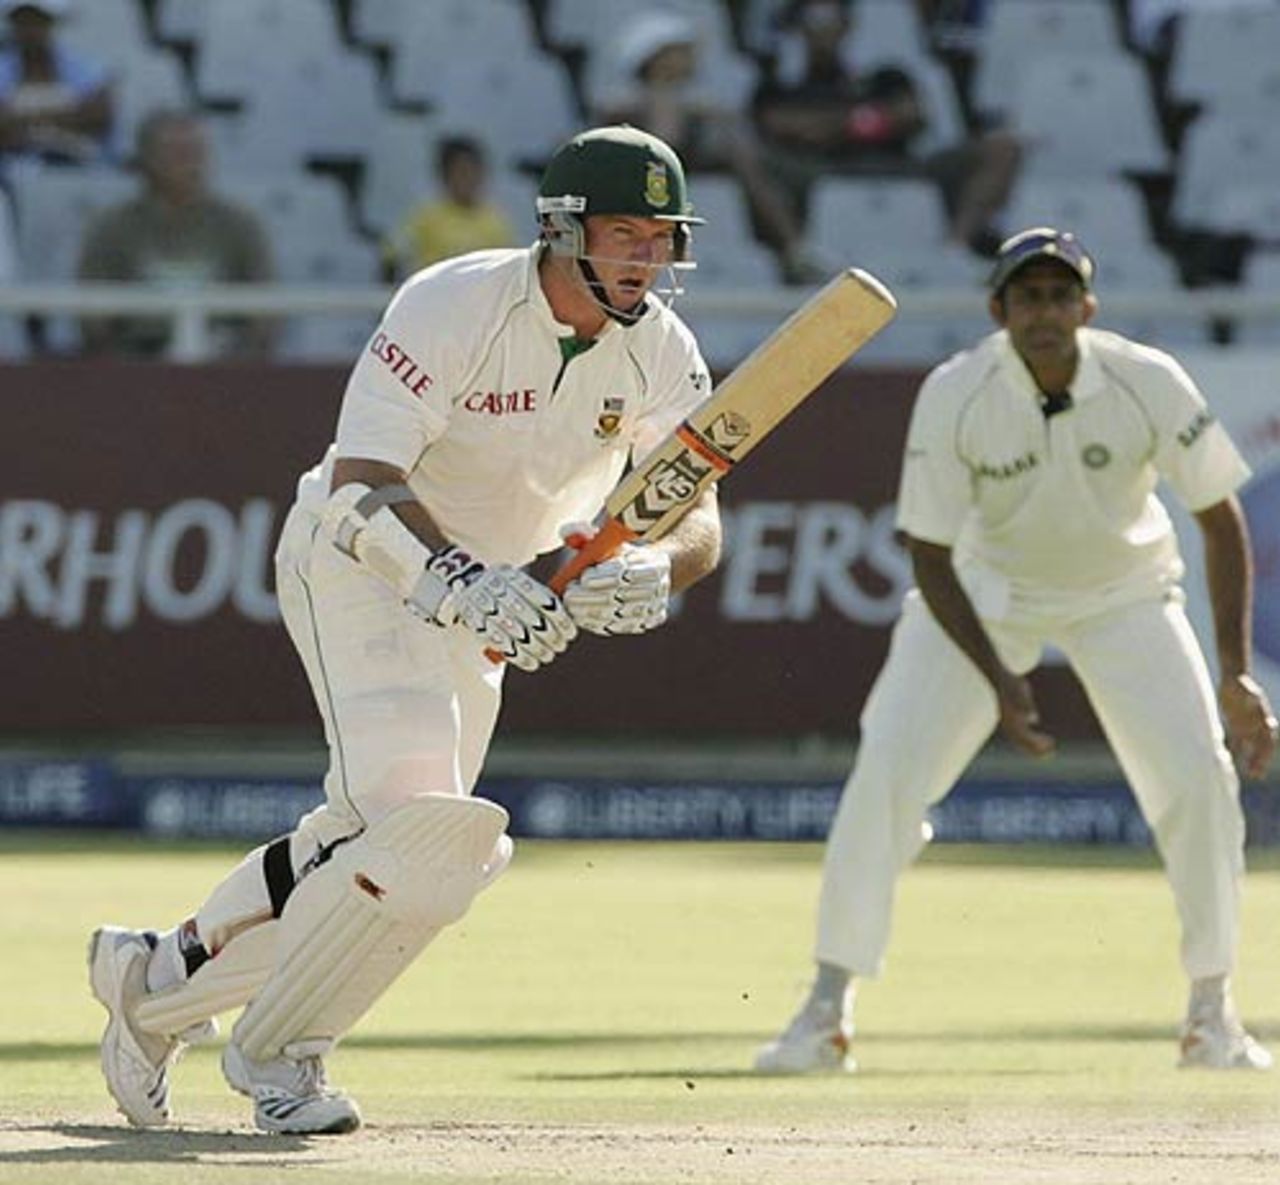 Graeme Smith drives straight during South Africa's chase, South Africa v India, 3rd Test, Cape Town, 4th day, January 5, 2007